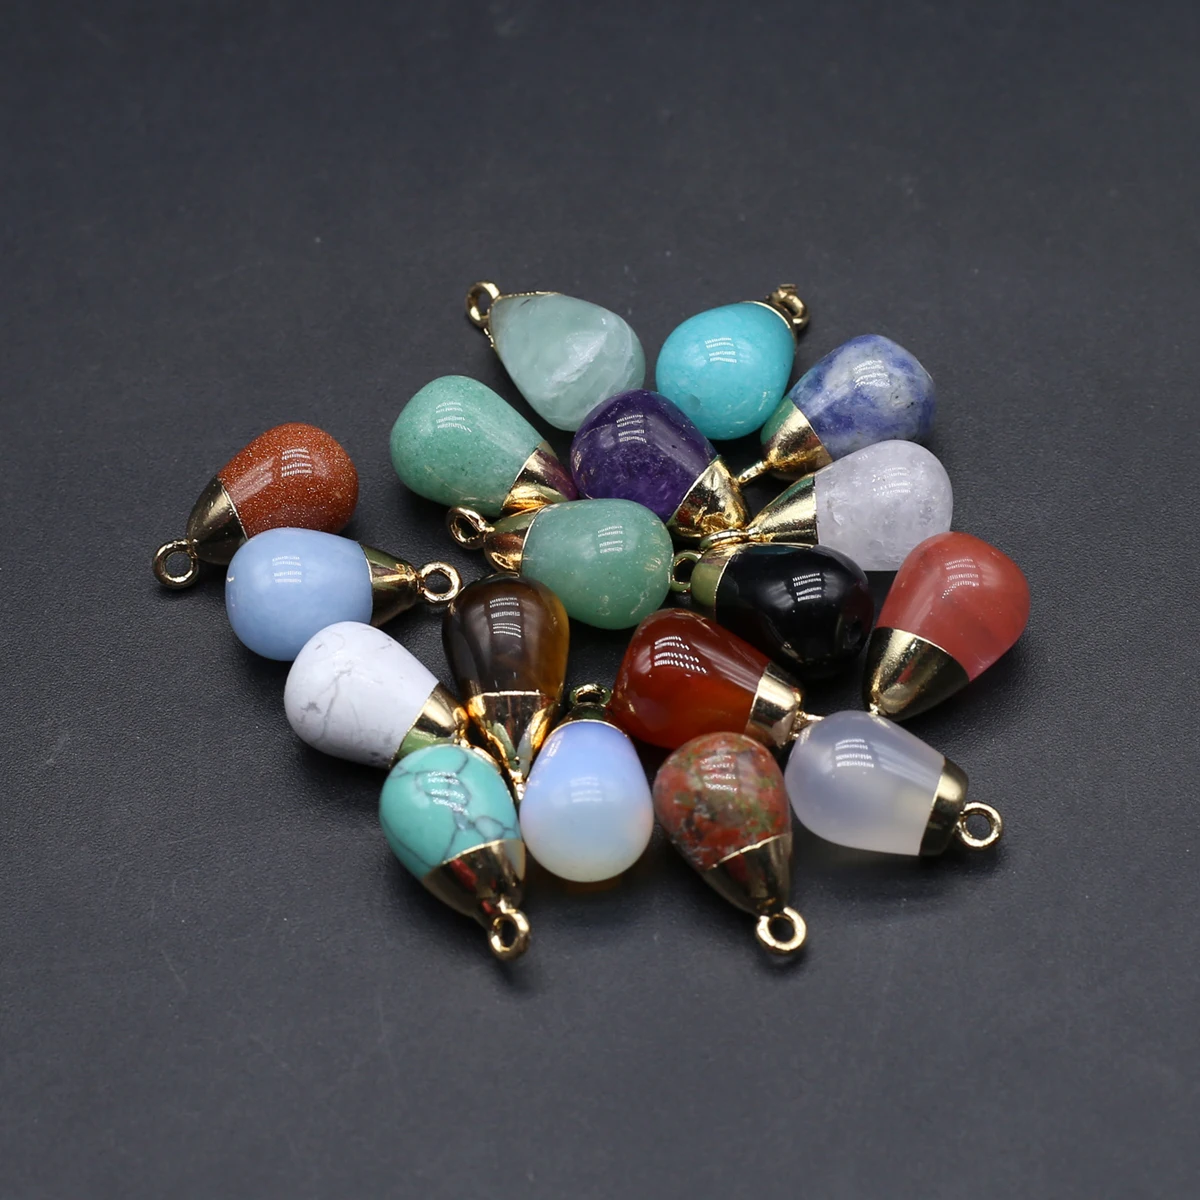 

15PCS Wholesale Natural Semiprecious Stone Random Color Droplet shaped Pendant Jewelry Making DIY Necklace Earrings Accessories